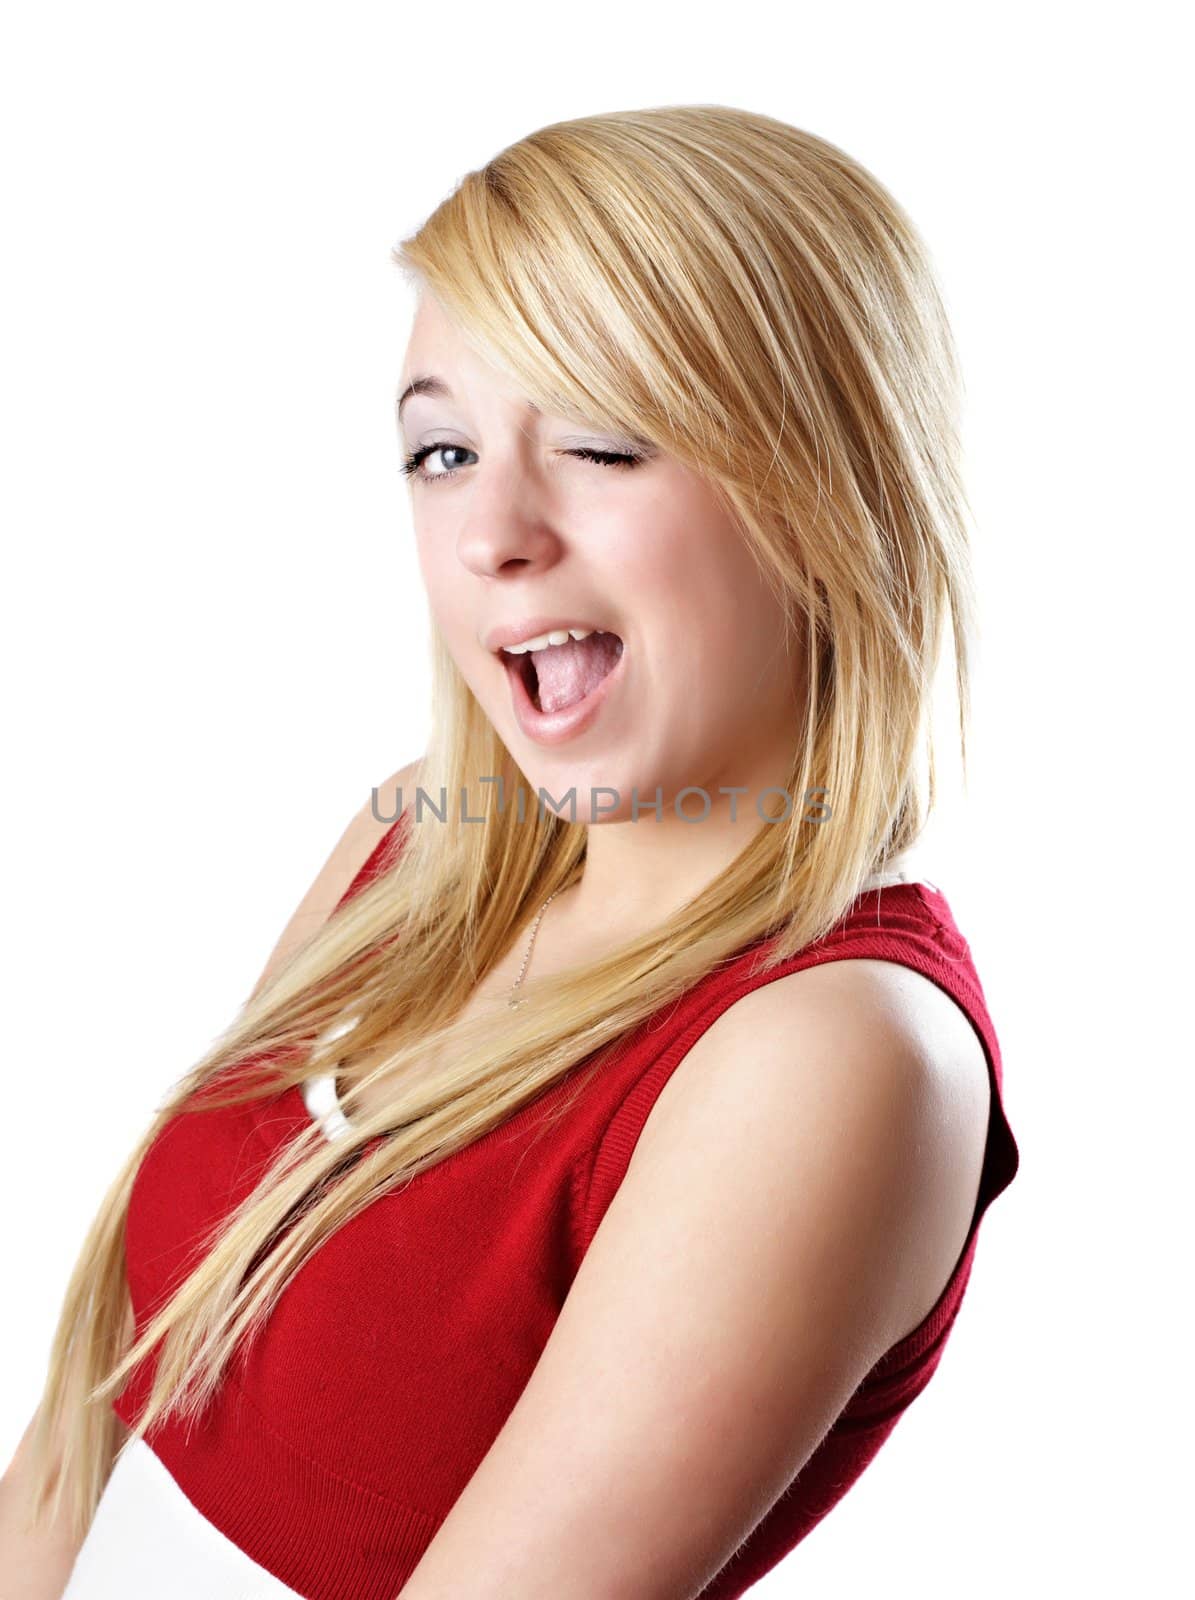 blond teen girl winking by lanalanglois